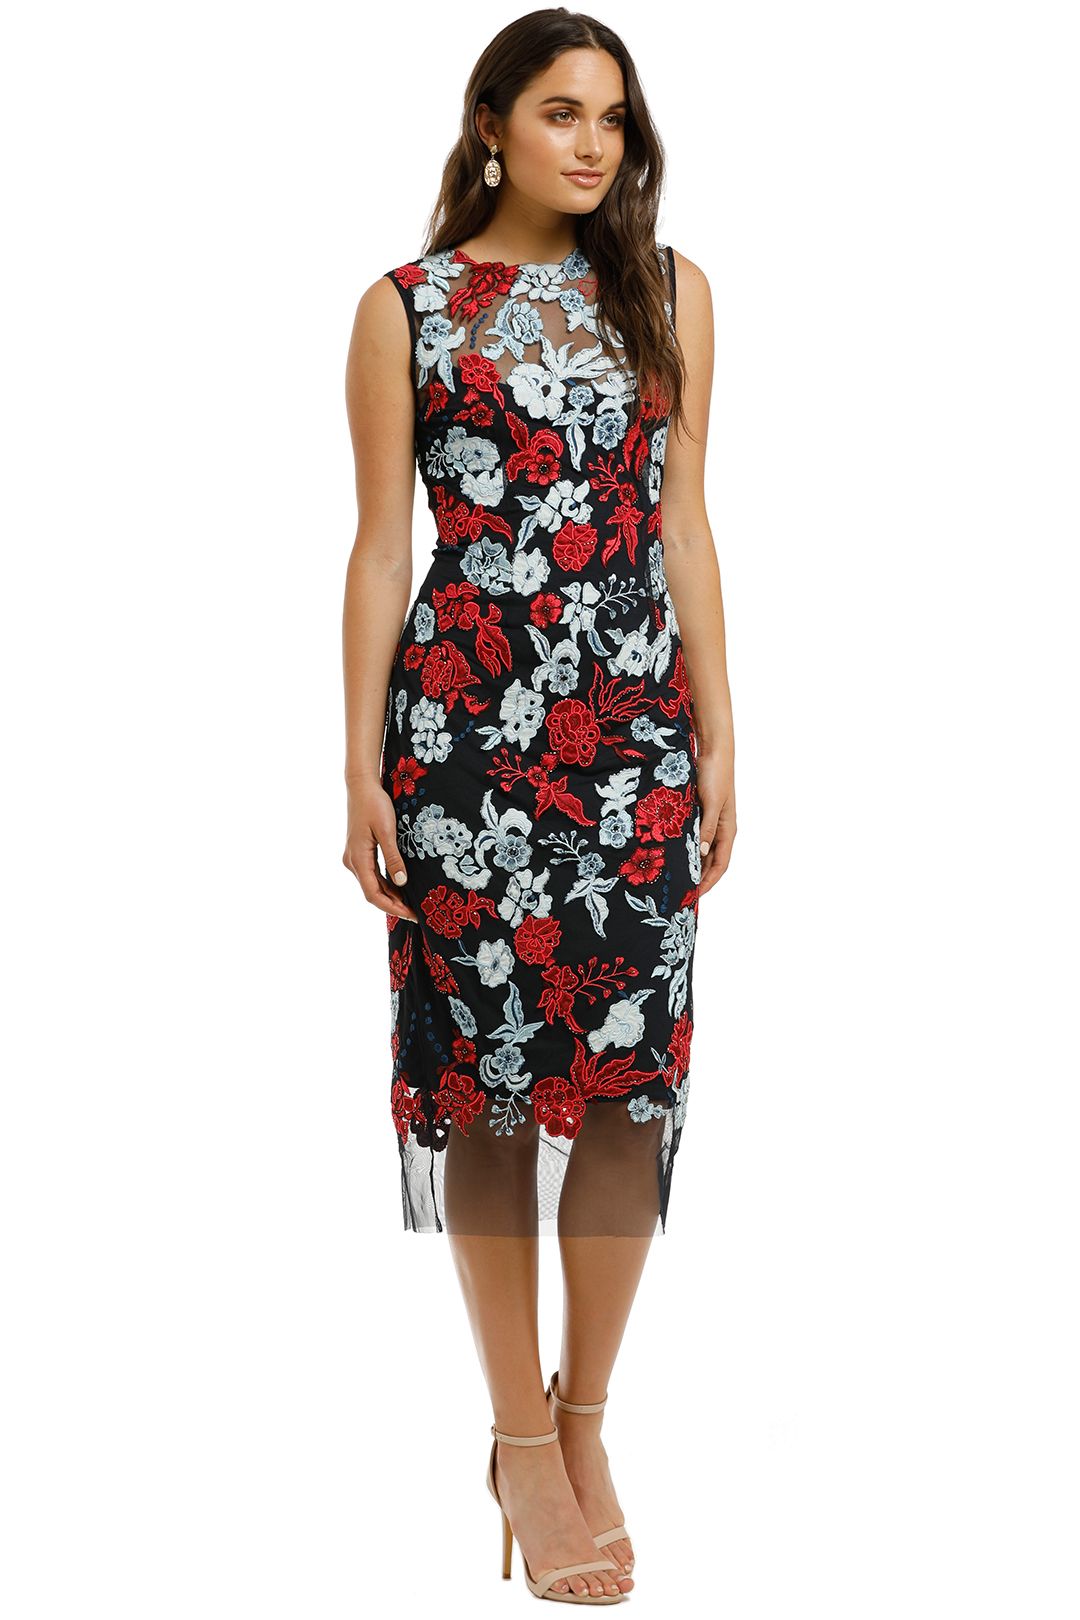 Moss-and-Spy-Primrose-Shift-Dress-Navy-and-Red-Side